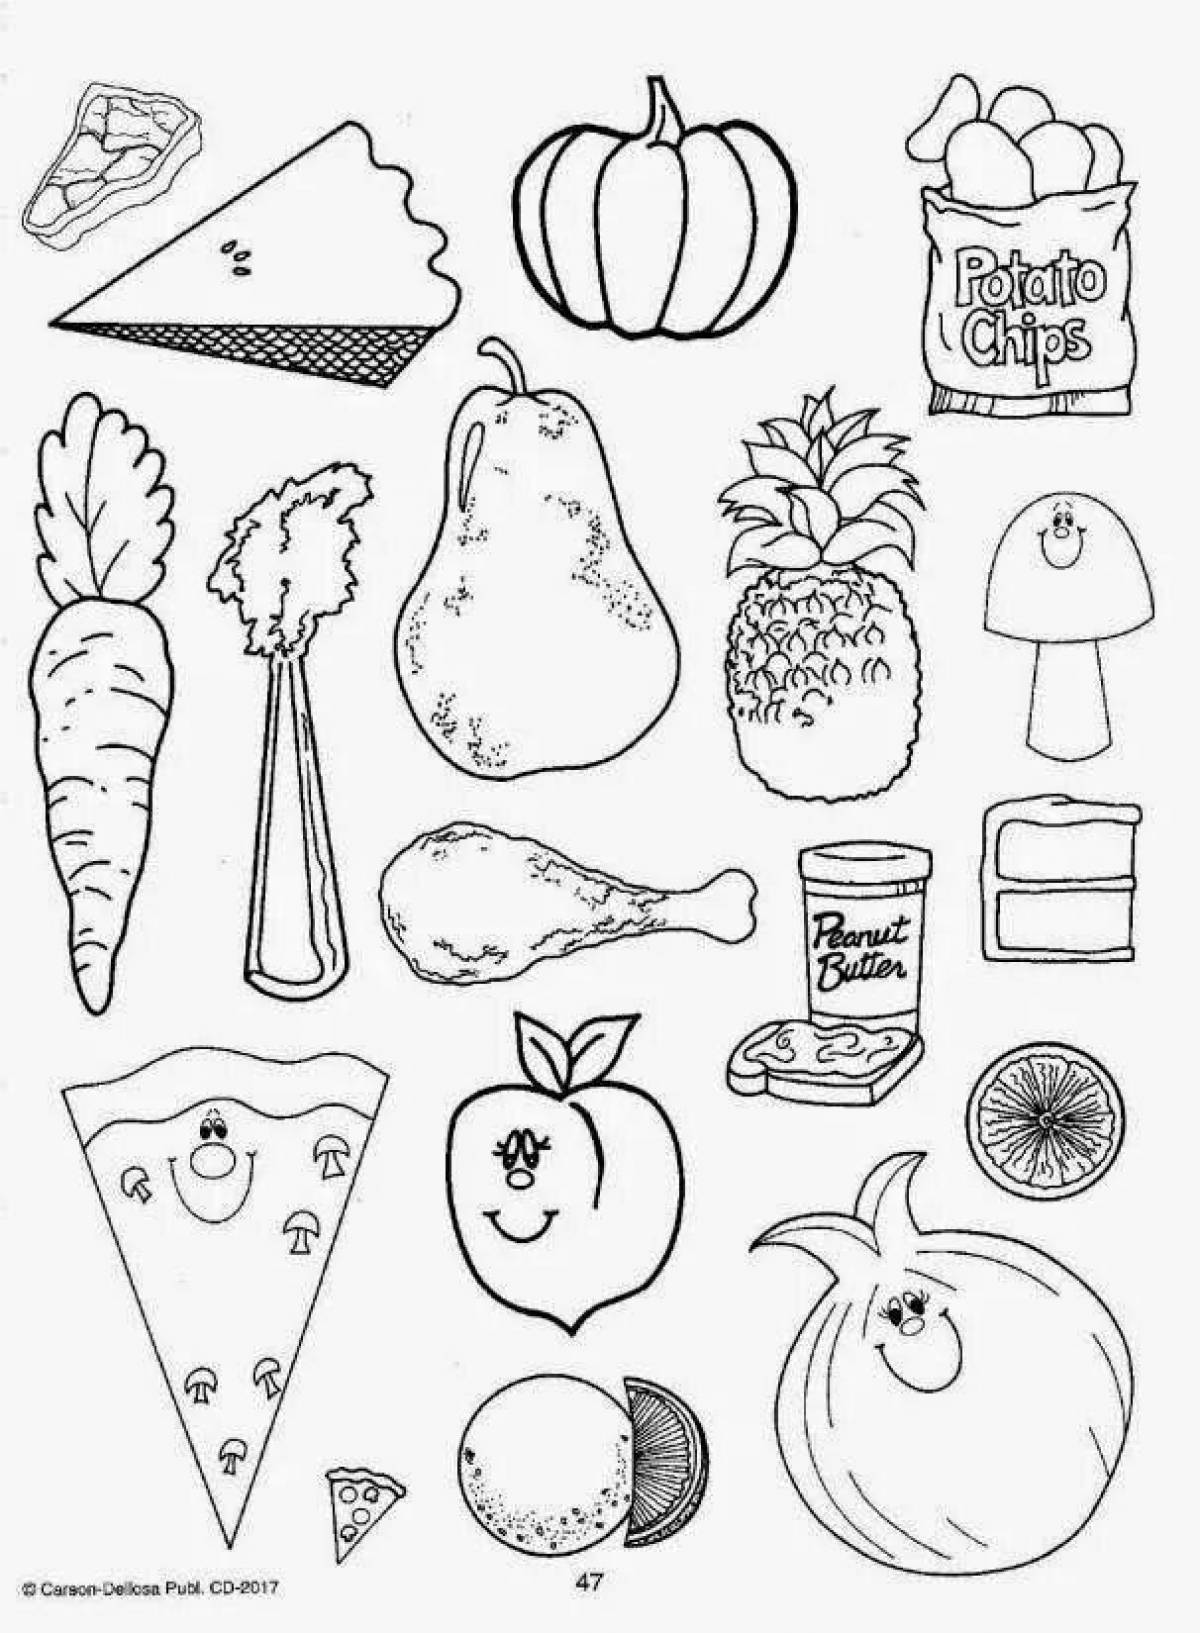 Colorful healthy food coloring book